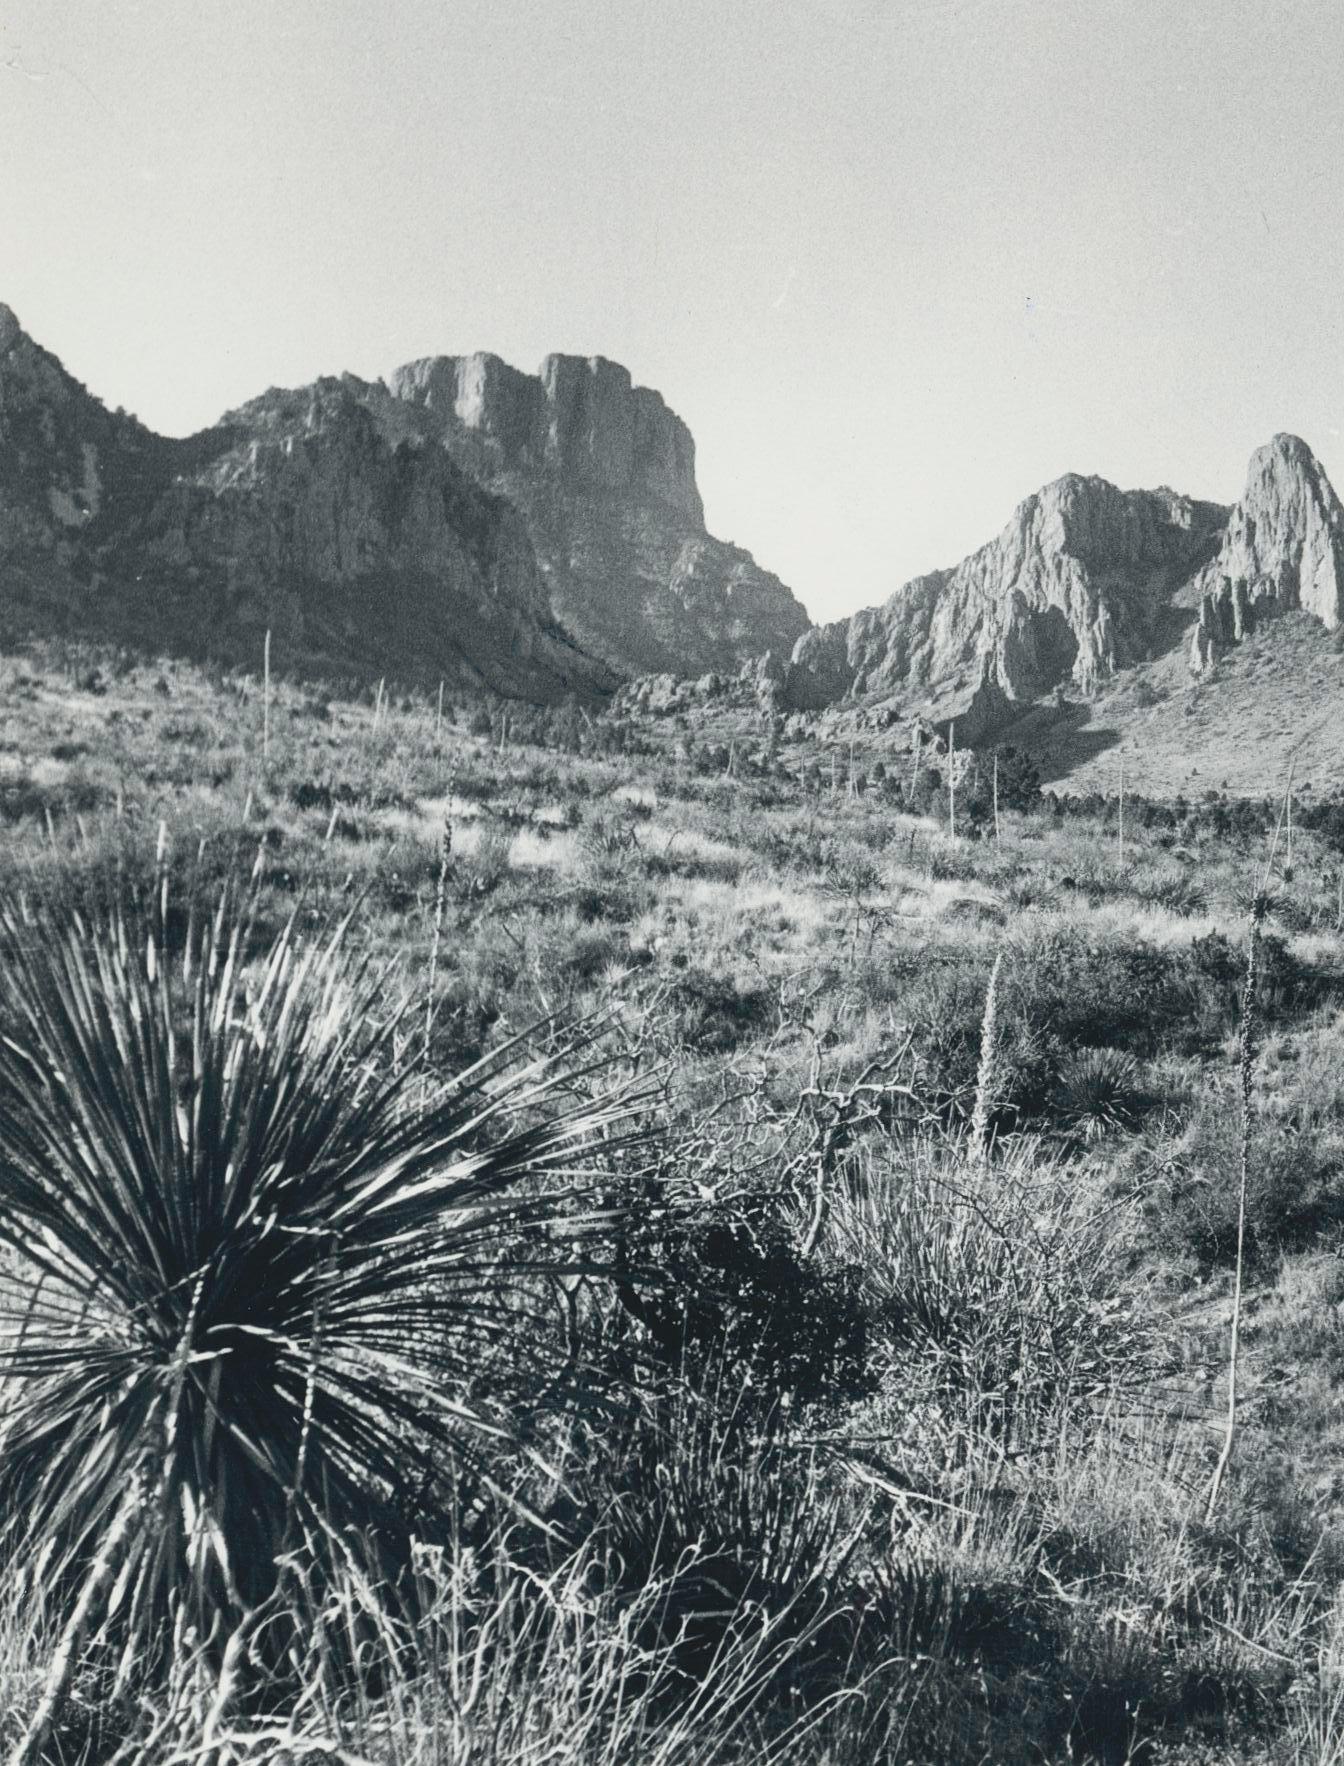 Big Bend Nationalpark, Texas, Black and White, USA 1960s, 16, 5 x 23, 2 cm - Photograph by Erich Andres